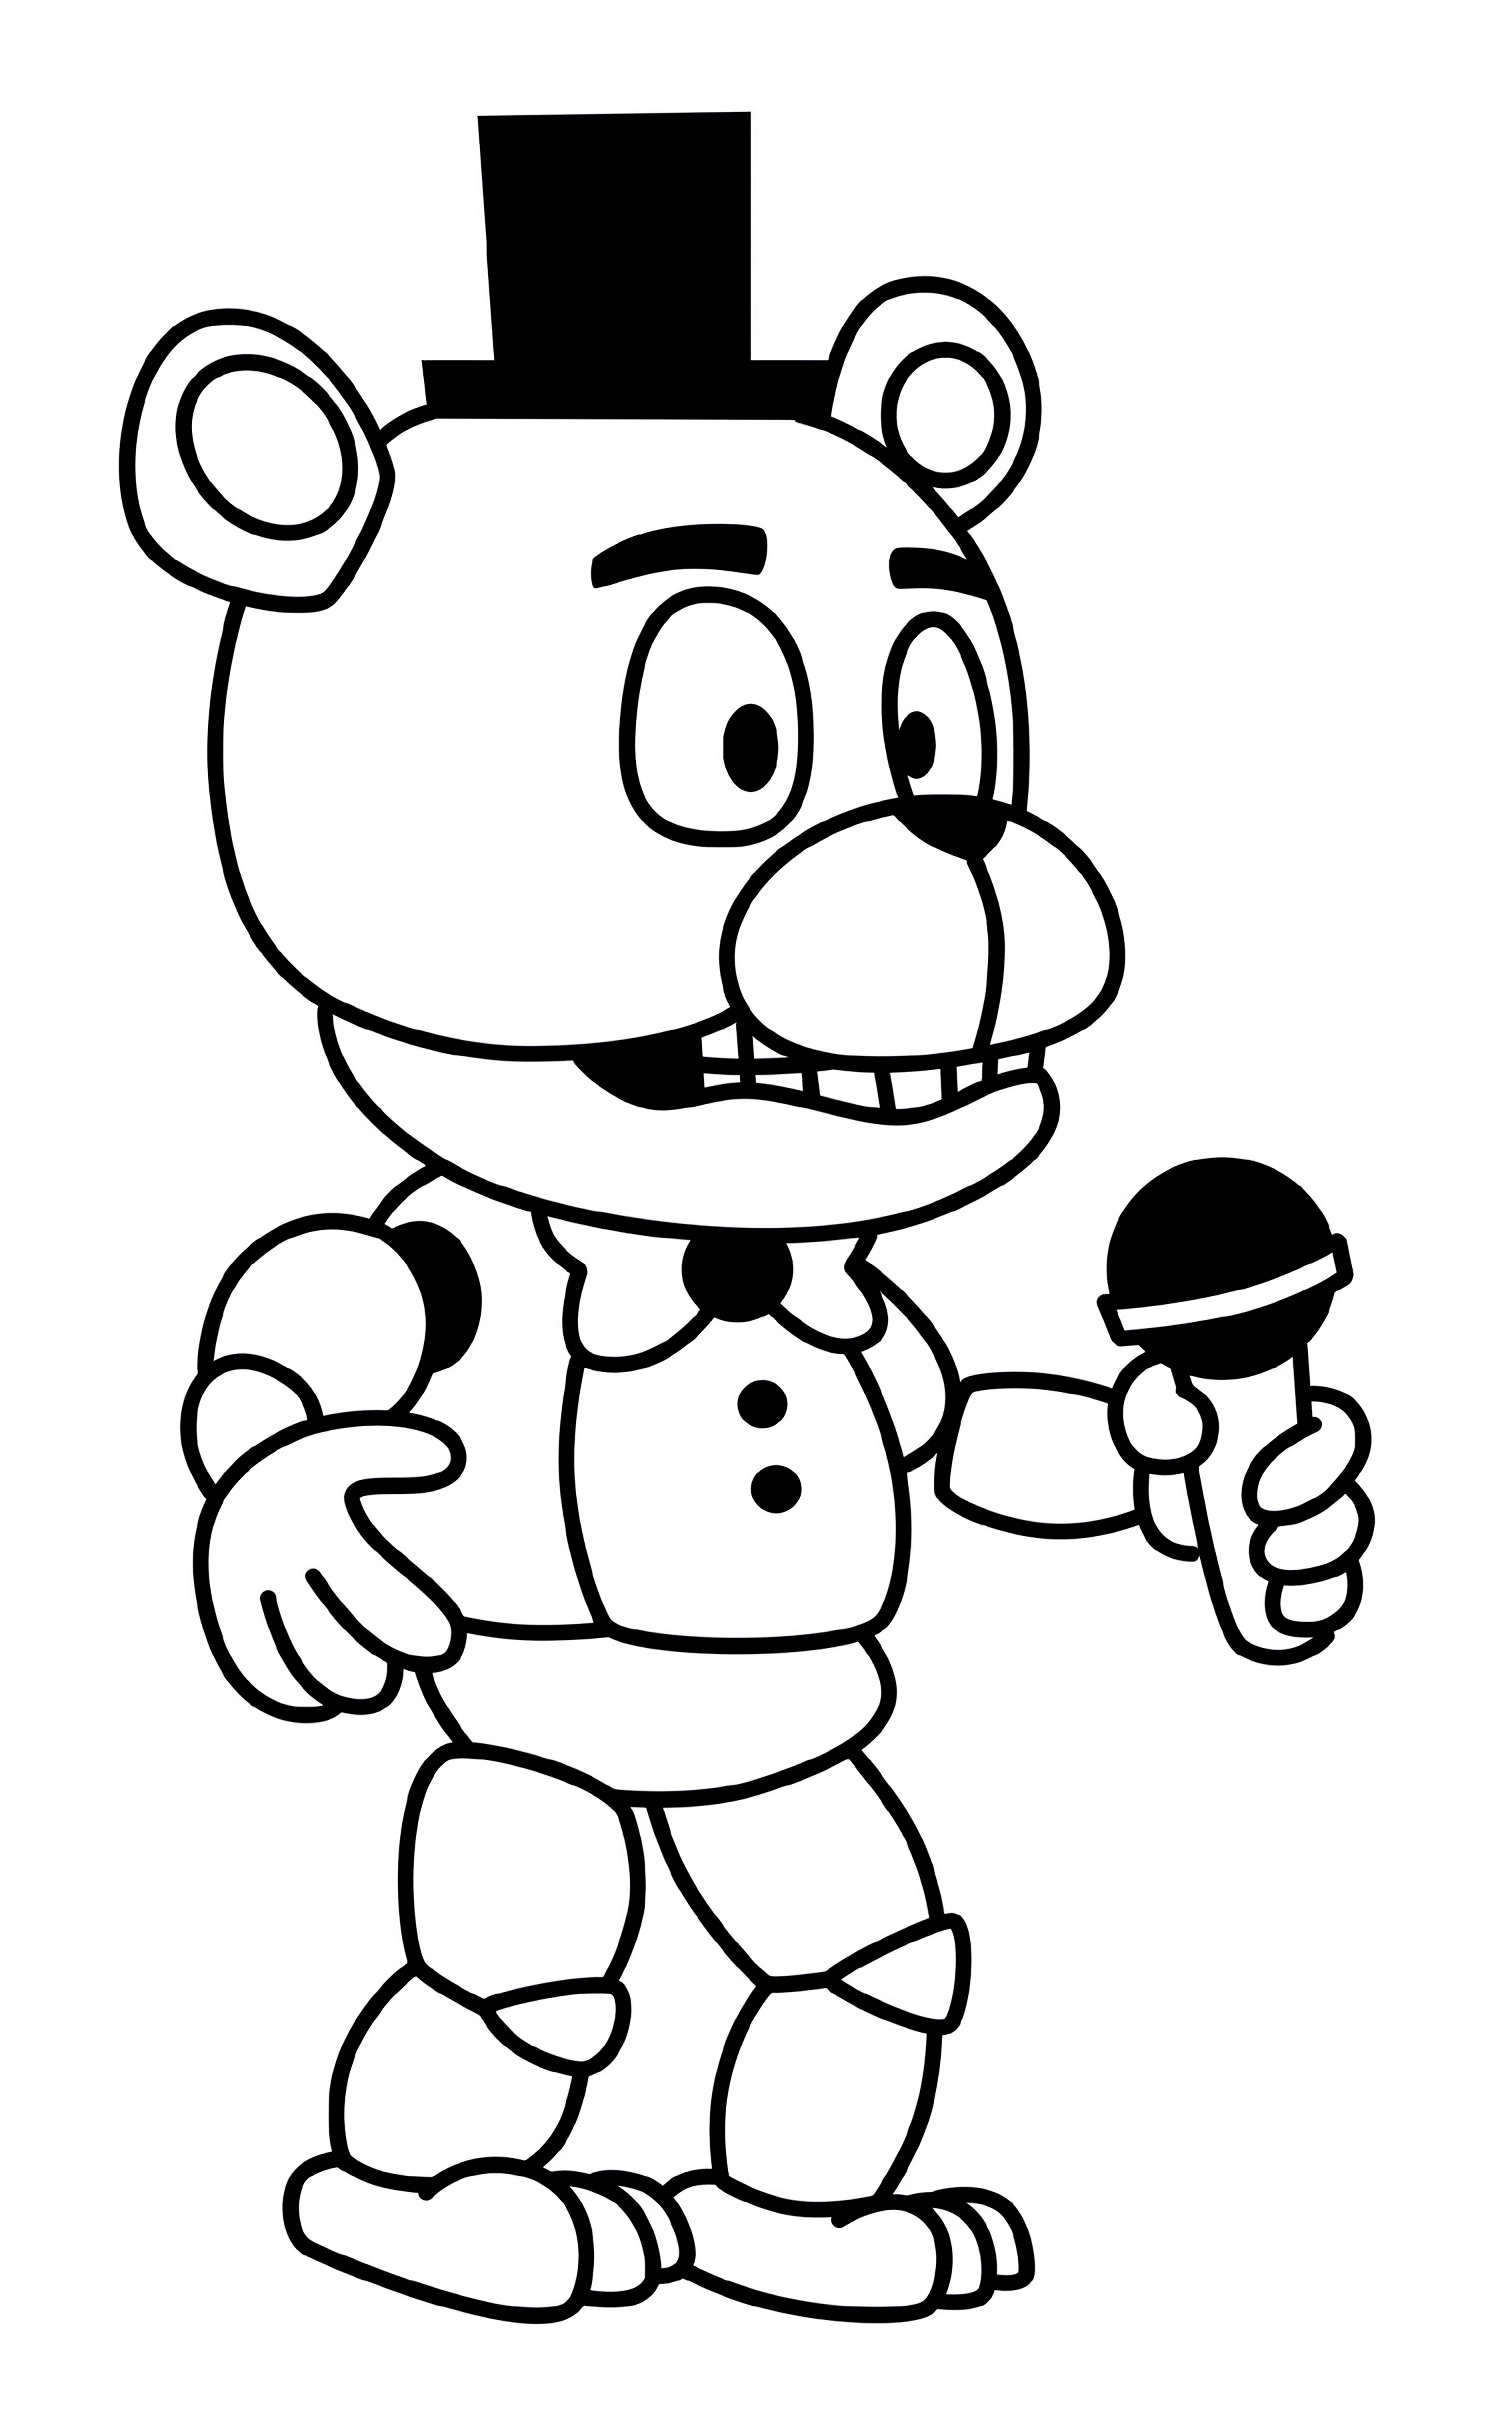 Coloring Pages : Five Nights Of Freddy Coloring Pages  D3d2ae994f4904d84c5c7d7317f76c25_coloring Fnaf To Print At Freddys _1585  Astonishing 5 Nights At Freddys Coloring Pages ~ Ny19 Votes